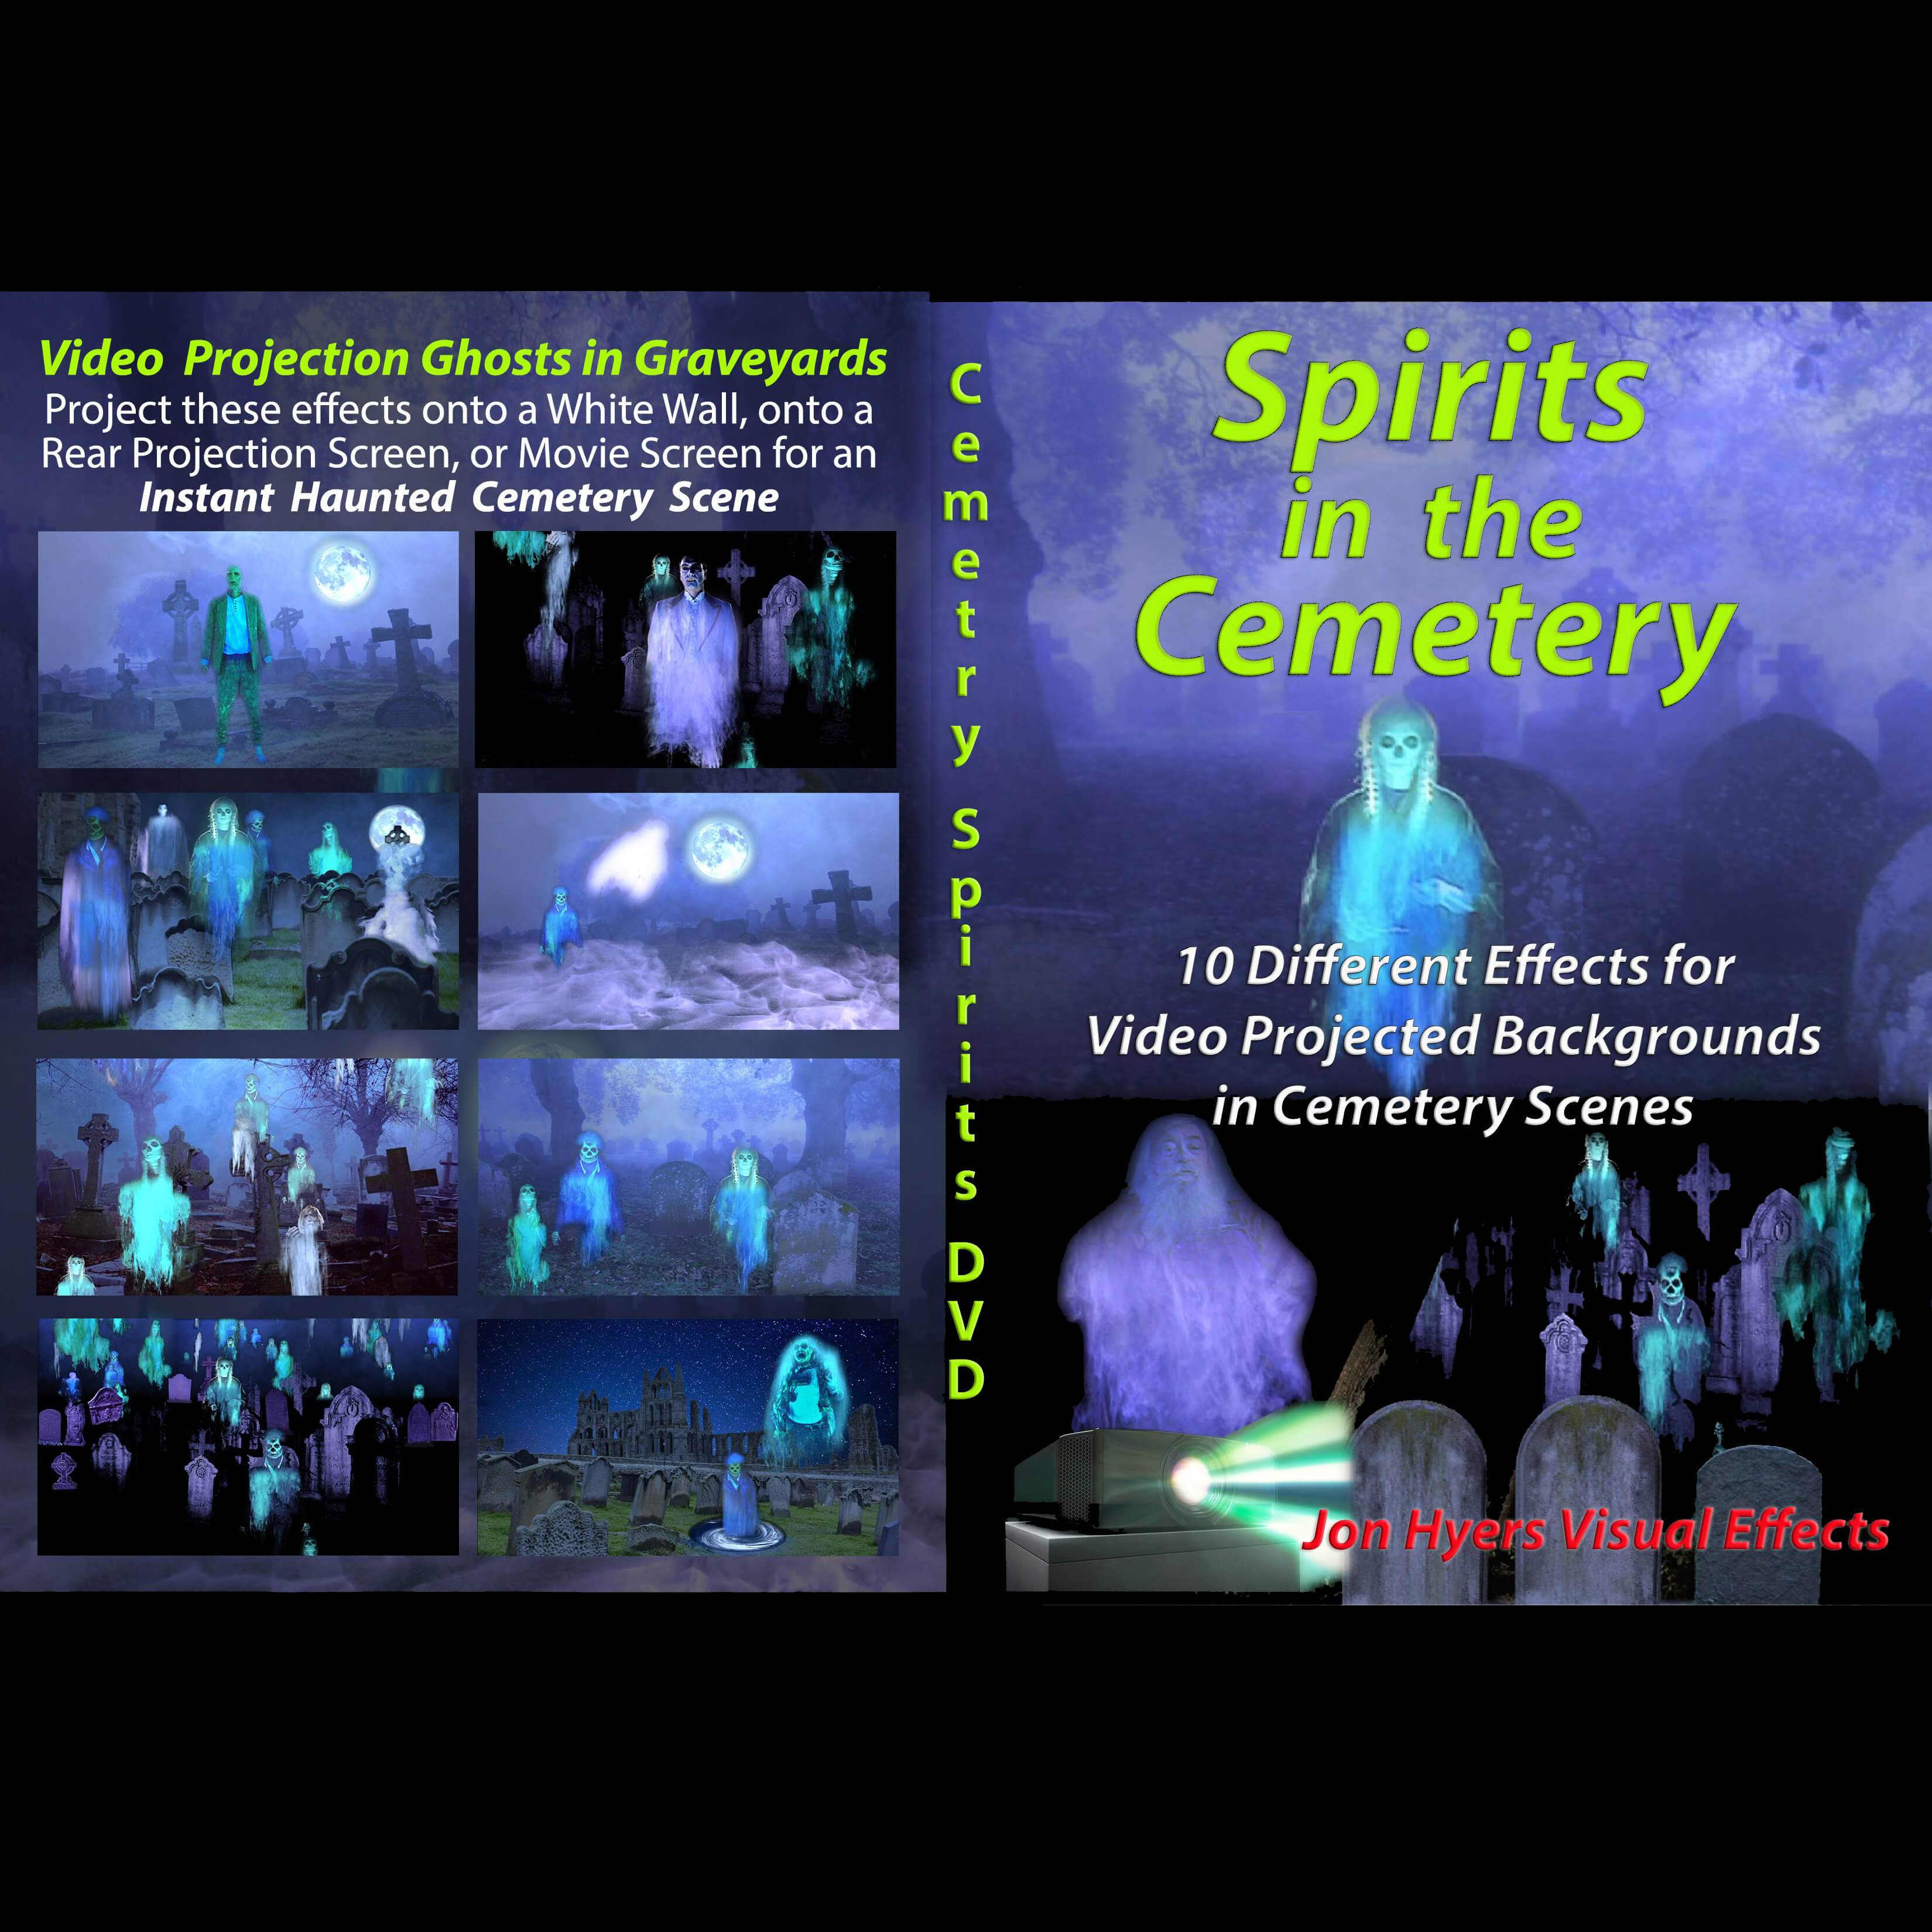 Spirits in Cemetery DVD w/ Digital Files Coupon